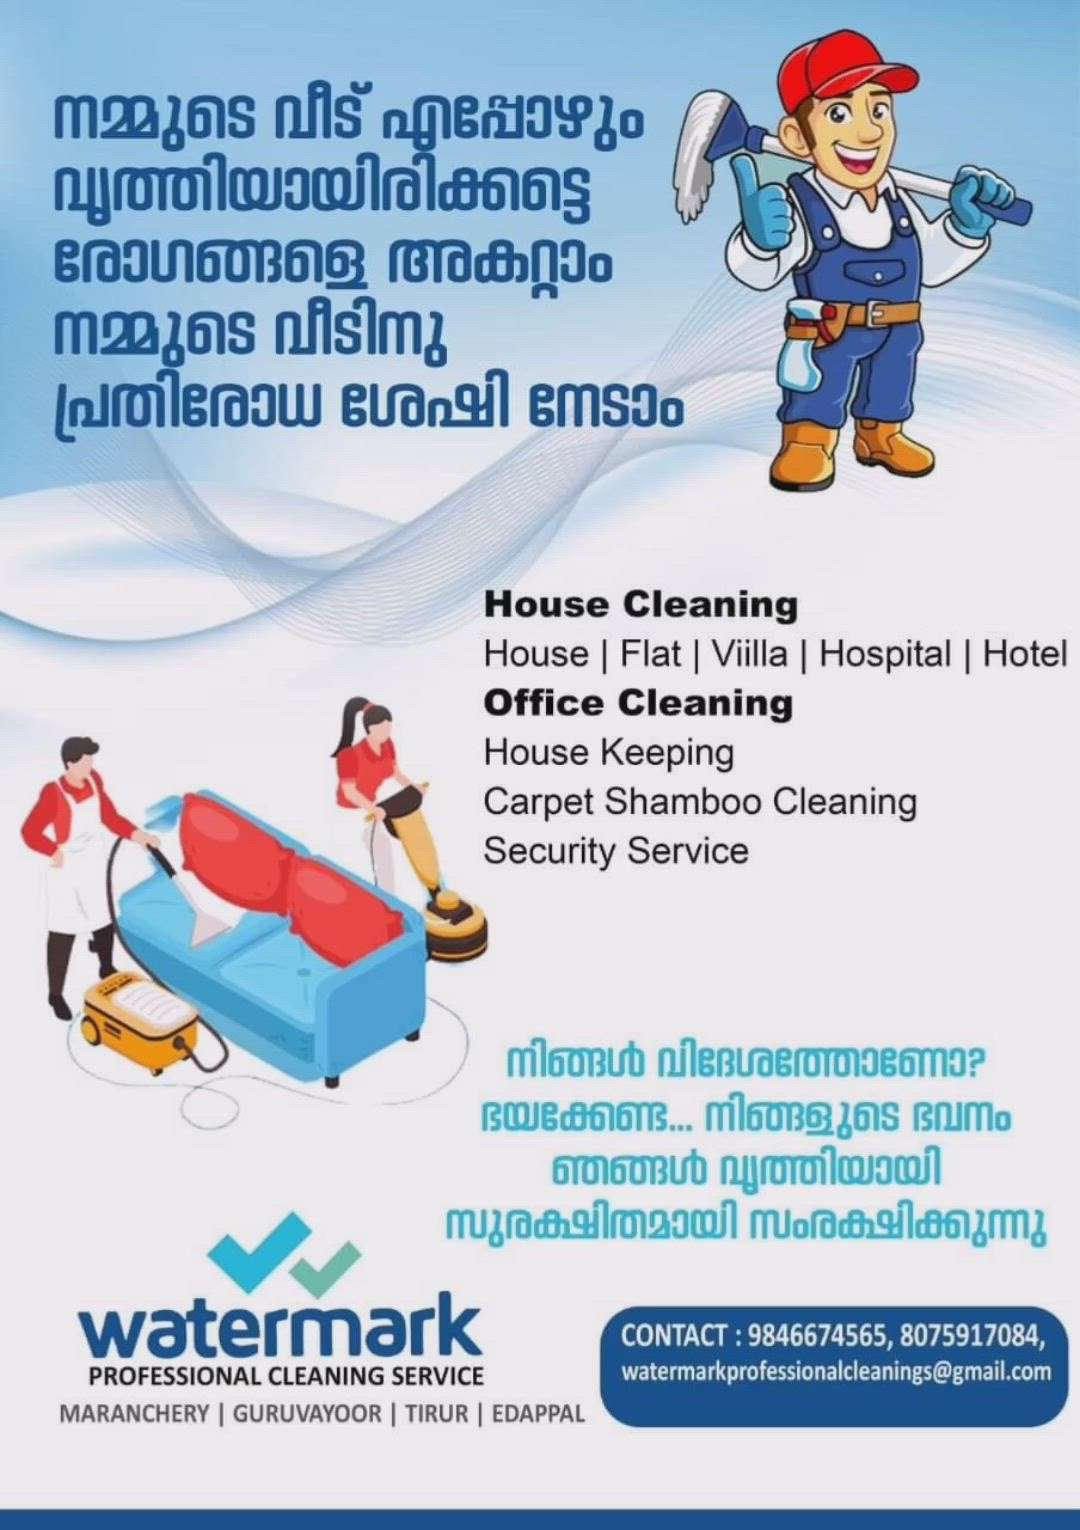 HOUSE,OFFICE,FLAT,APPARTMENTS,HOSPITALS
CLEANING AND DISINFECTION..

# Trained & uniformed staff (Ladies & Gents)
# Free site inspection
# Use branded chemicals &Equipments
# Tailor-made packages
# Fully insured and local registered staffs
# Quality service guaranteed
# service available Malappuram,Thrissur,Palakkadu districts
# service available
        Onetime,monthly,contract base

Call 24/7...9846 6745 65
Email:watermarkprofessionalcleaningservices@gmail.com
 
"RECLAIMING THE SUPREMACY OF HYGIENE"